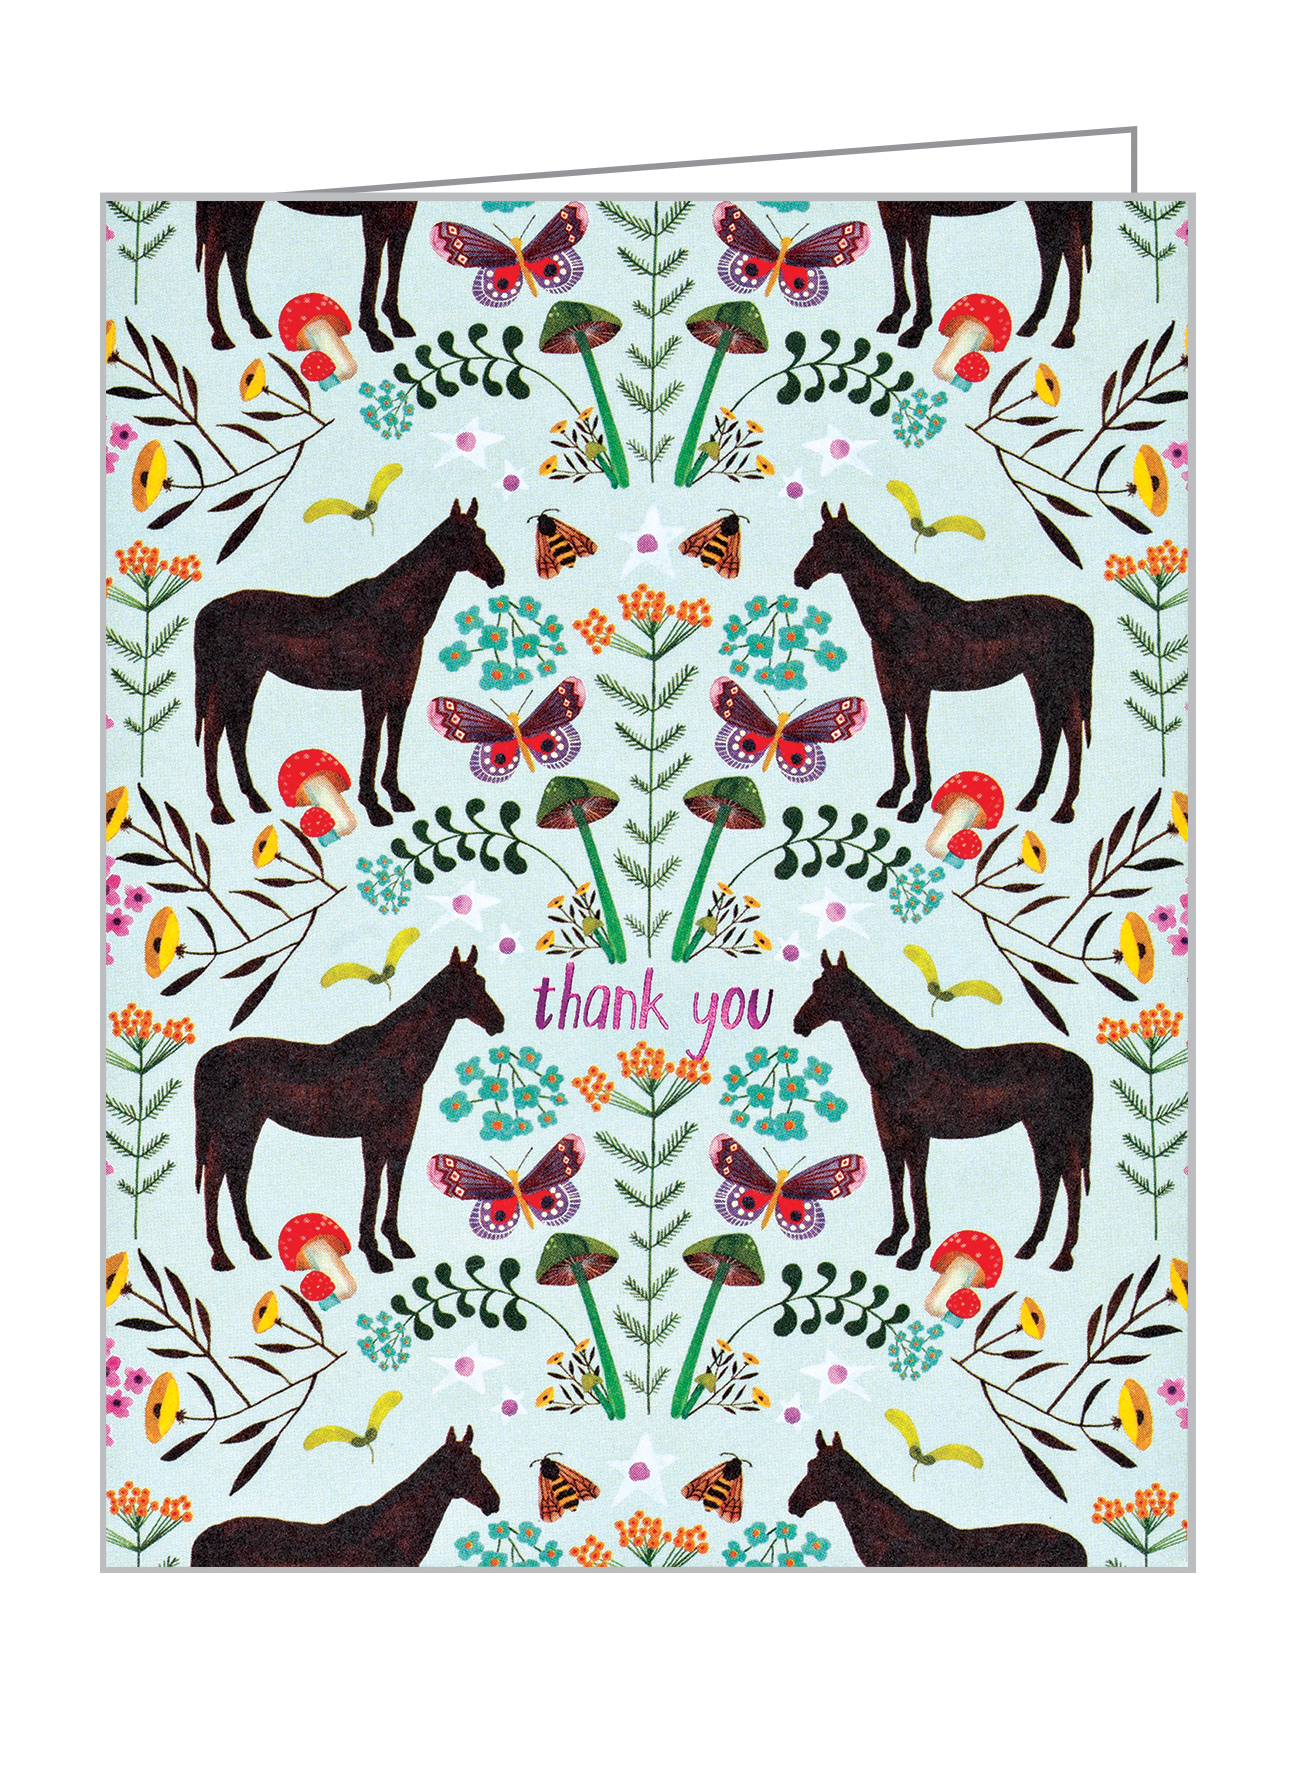 Anisa Makhoul’s whimsical horse in meadow design, to thank you notecard, by teNeues Stationery.